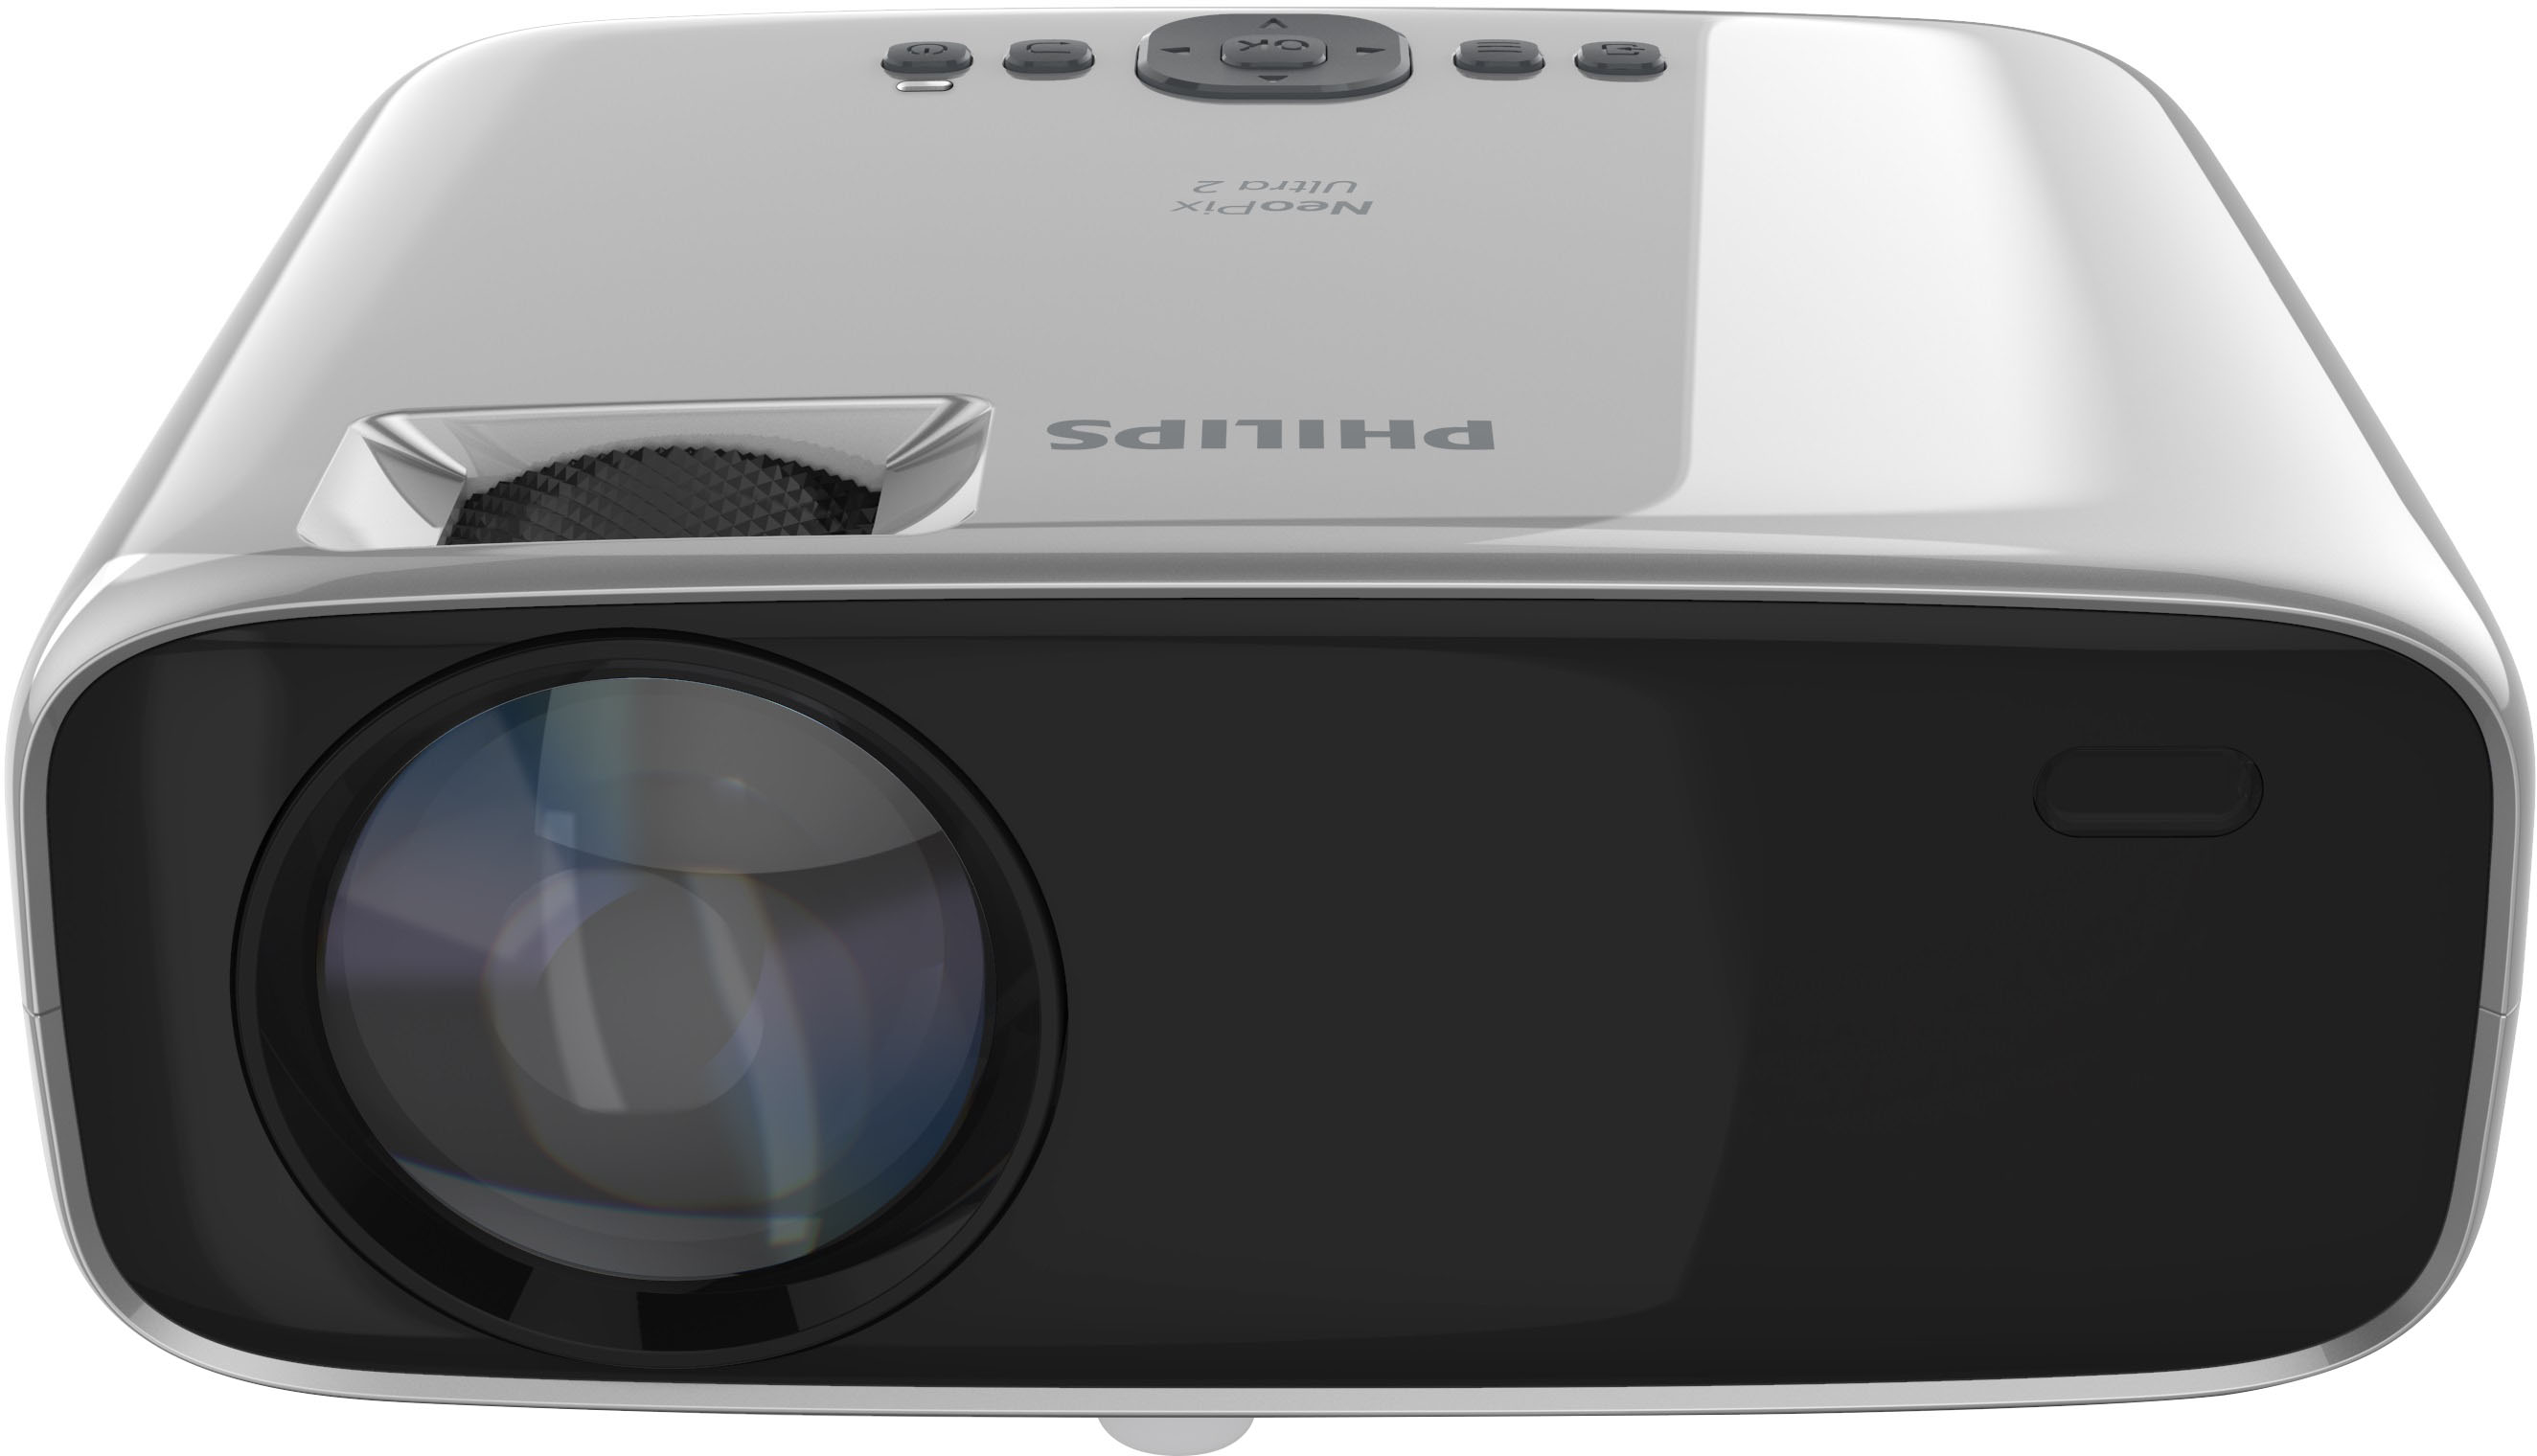 Philips - NeoPix Ultra 2, True Full HD projector with Apps and built-in Media Player - Silver